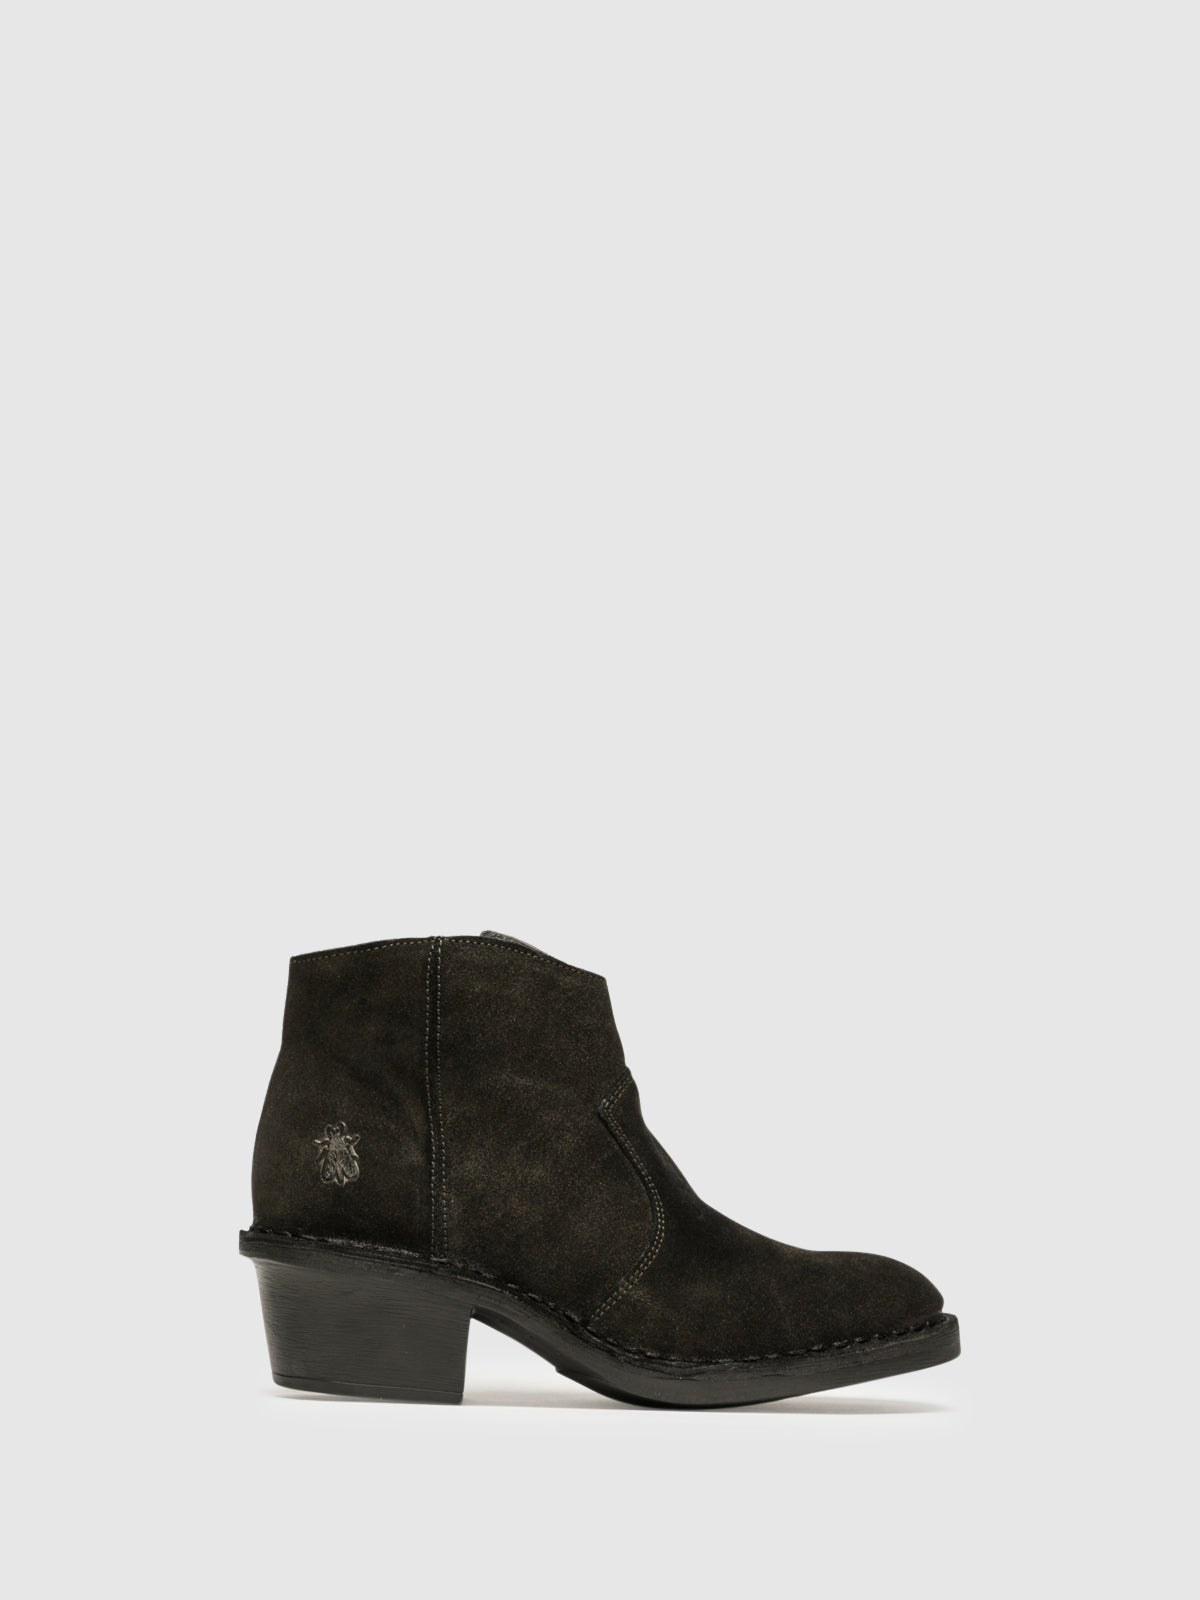 Fly London Khaki Zip Up Ankle Boots